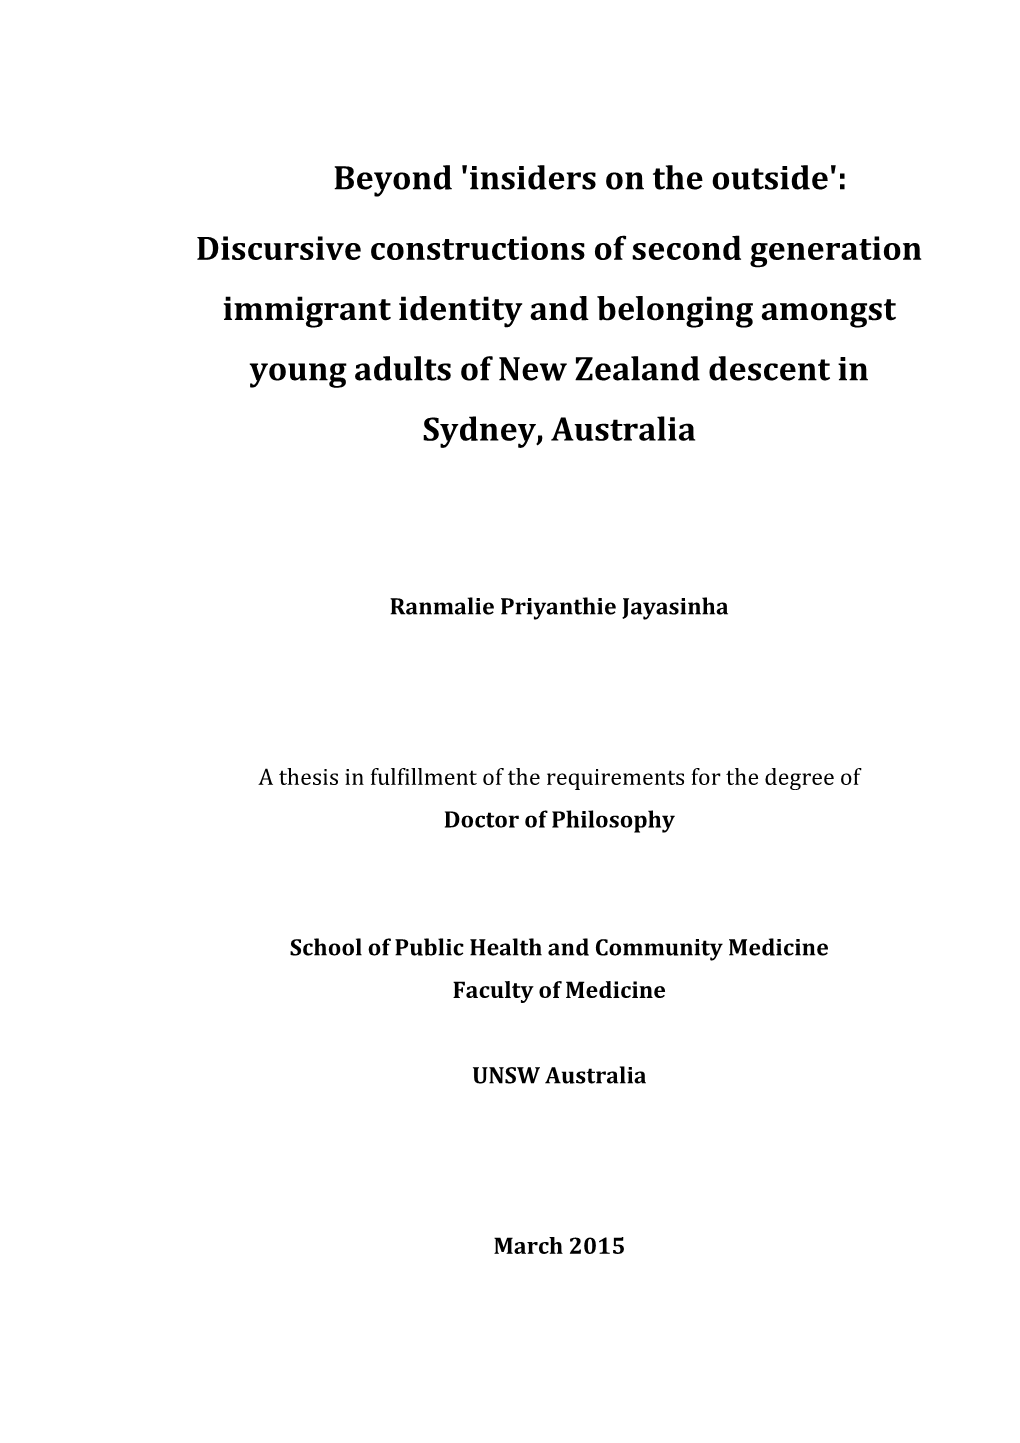 Discursive Constructions of Second Generation Immigrant Identity and Belonging Amongst Young Adults of New Zealand Descent in Sydney, Australia